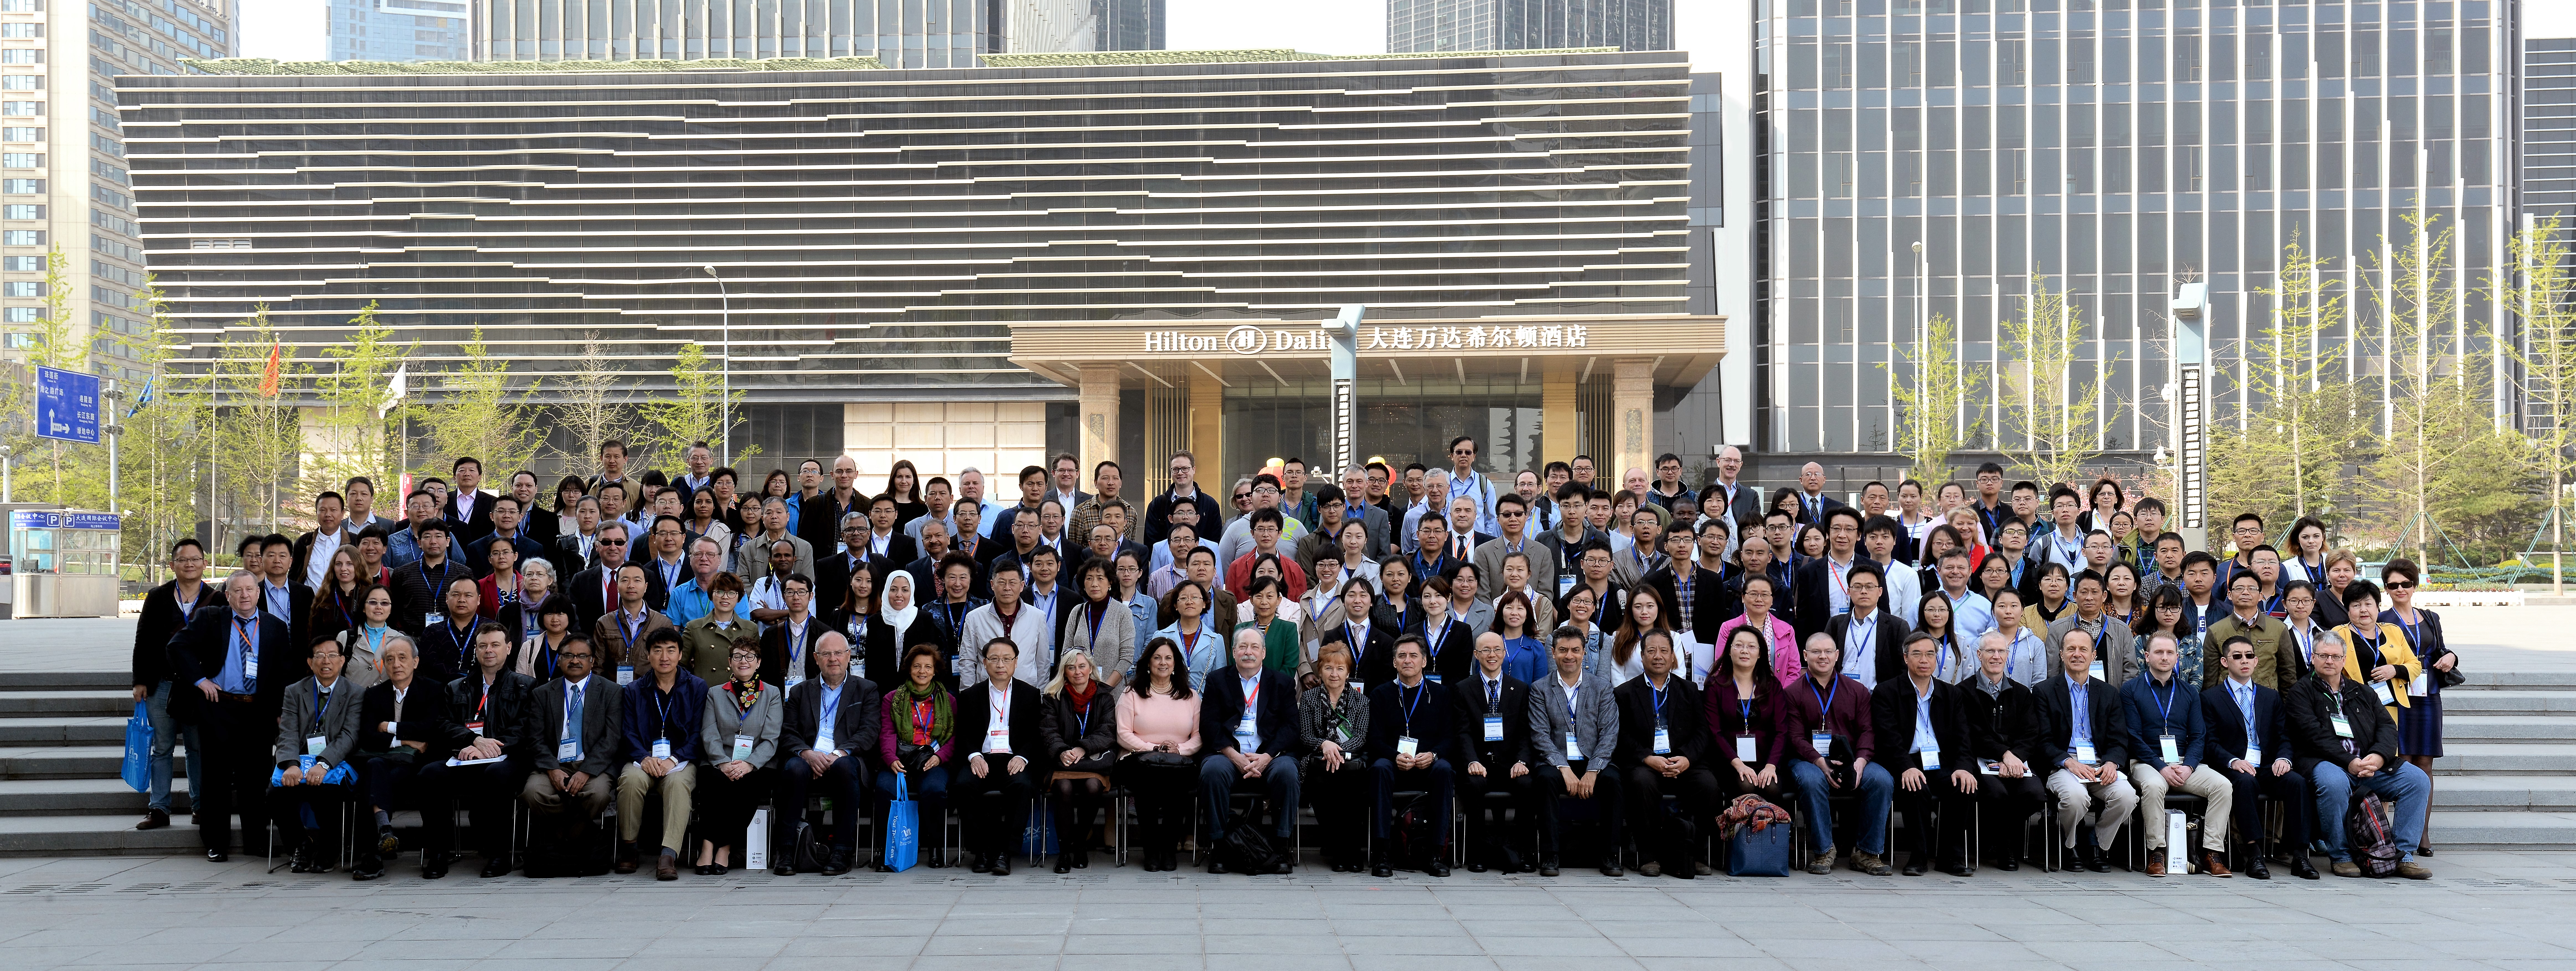 BIT's 7th Annual World DNA and Genome Day - 2016. BITS 9th Annual World Protein and Peptide Conference - 2016. Dalian International Conference Center, Dallian, China.